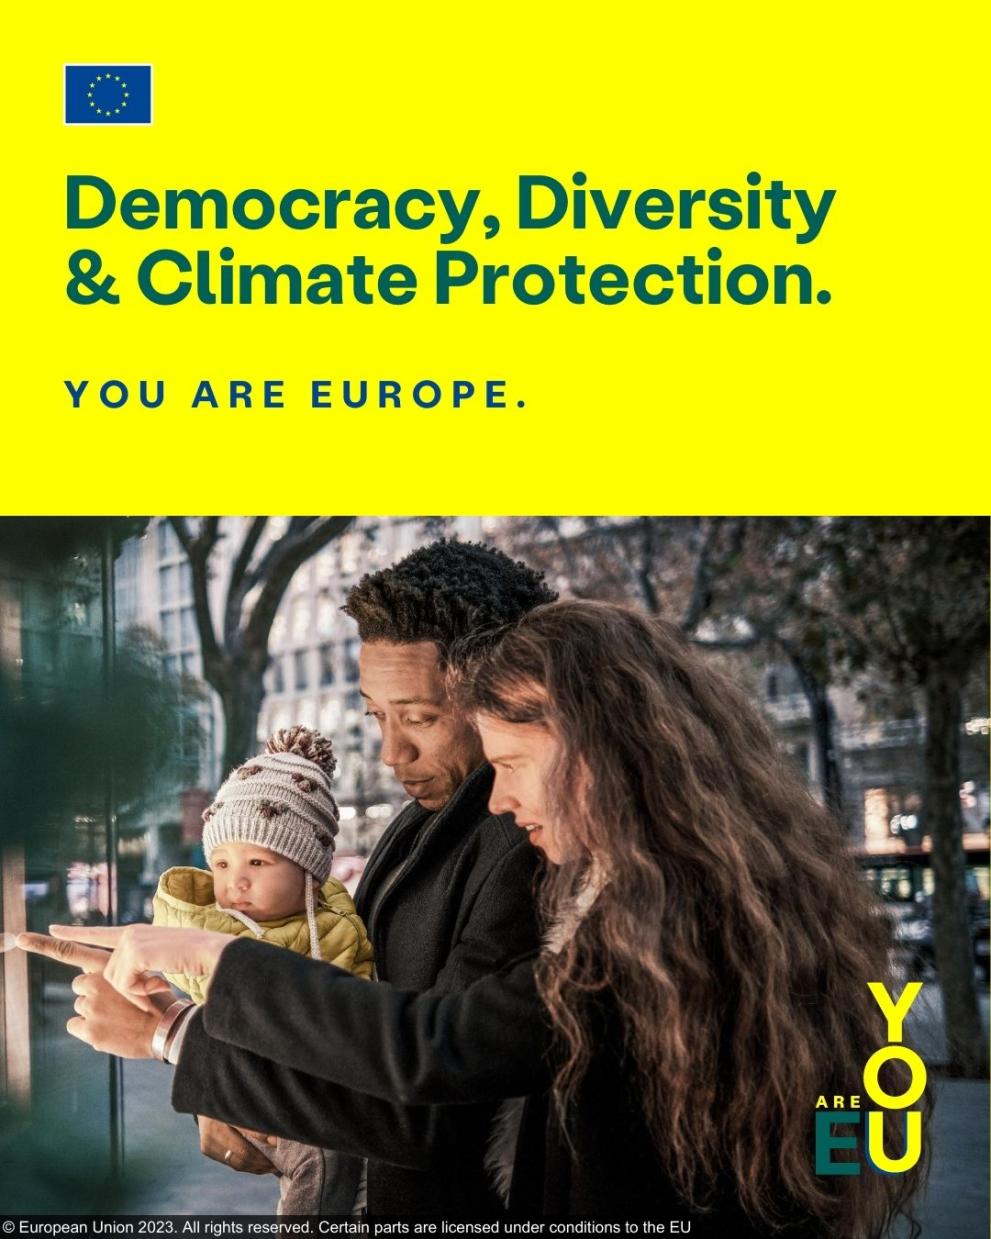 Democracy, Diversity and Climate Protection.